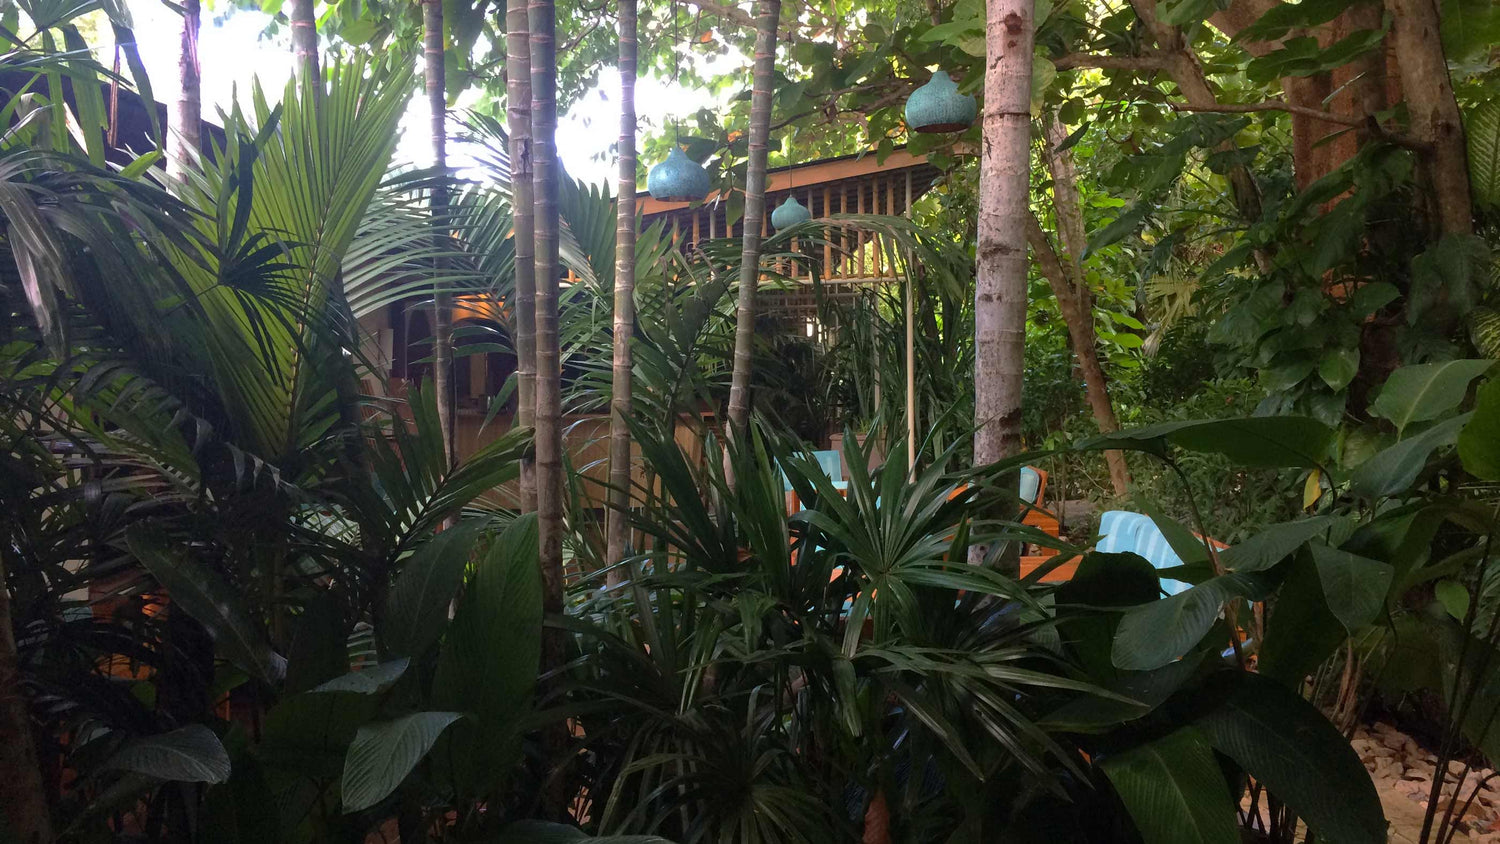 A tropical garden with lots of plants and trees